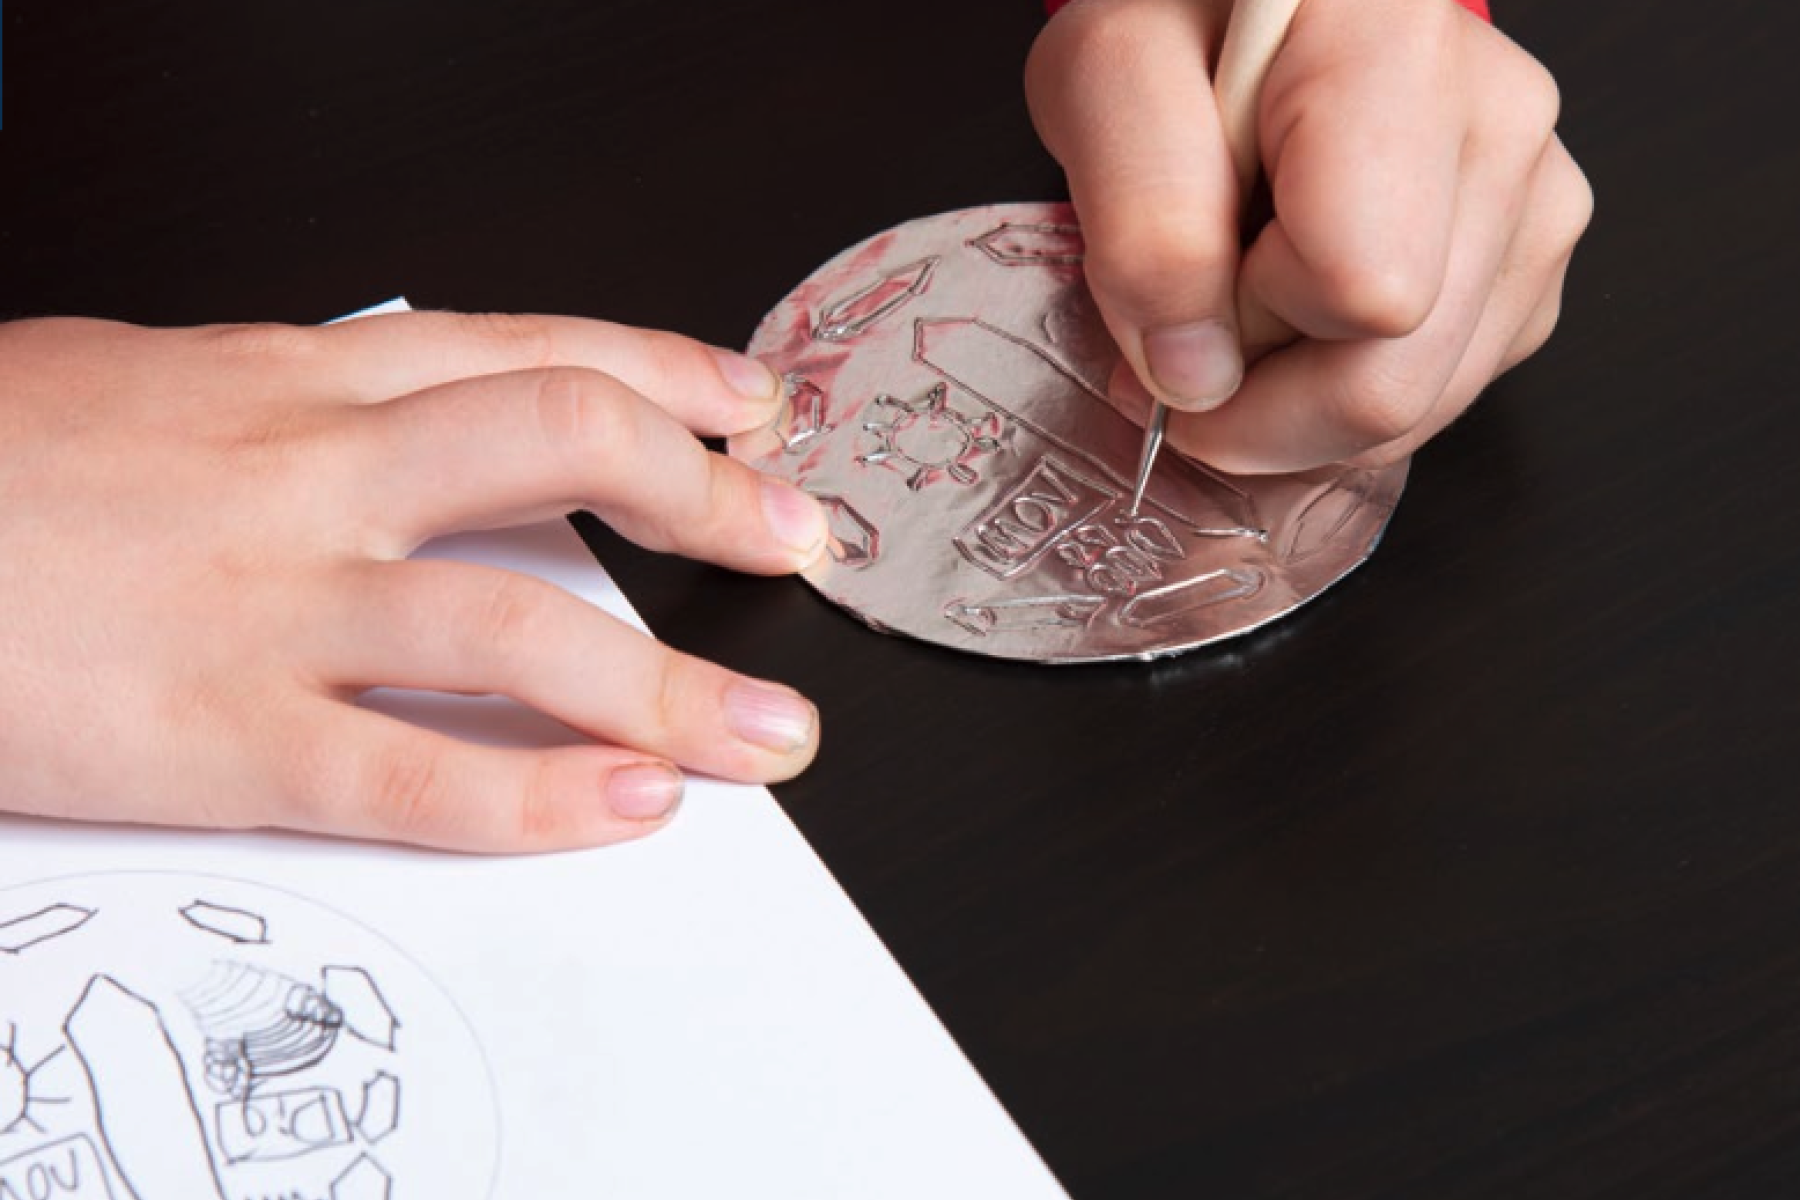 Hands Etch a Design into Foil as Part of the Moon Medallion Activity